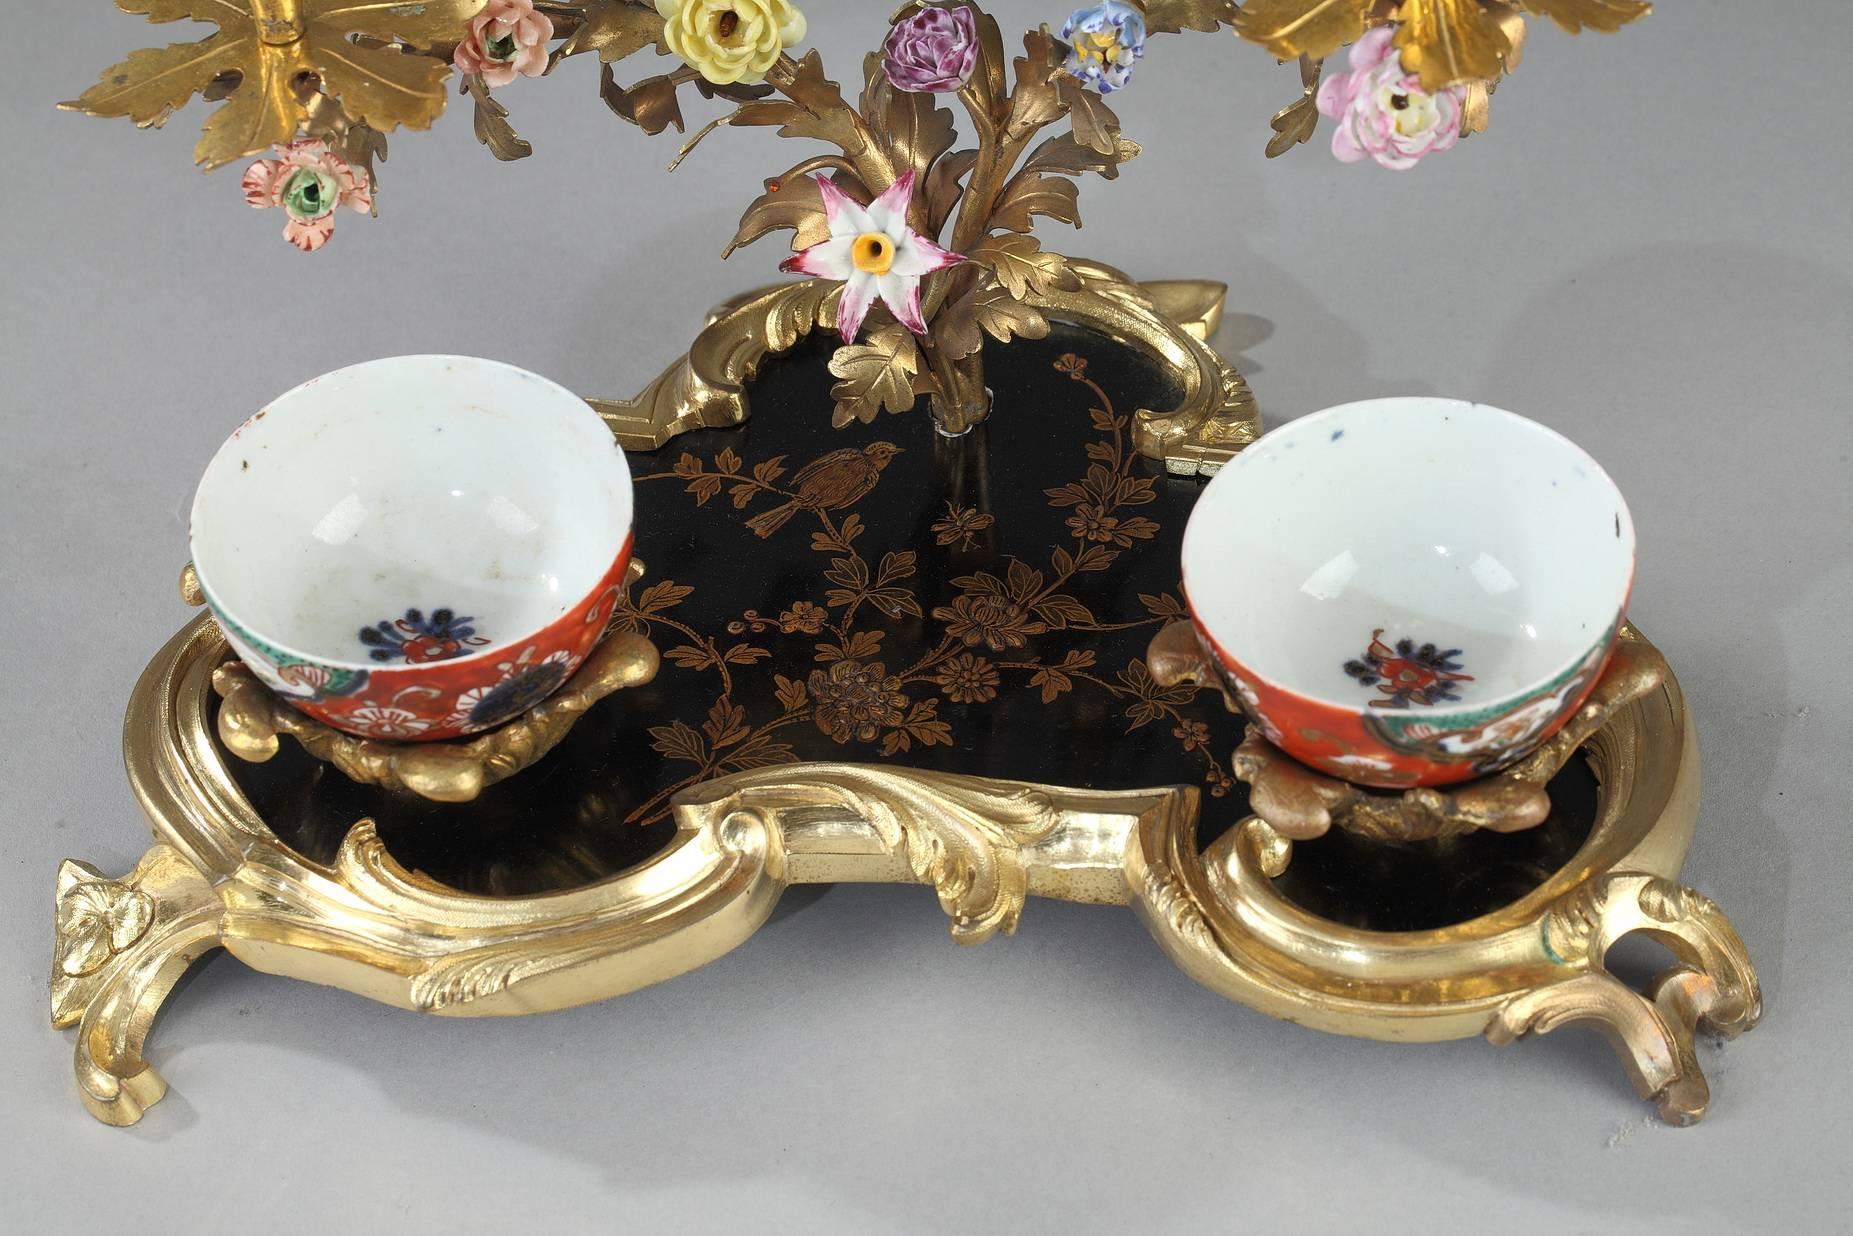 Inkwell and candelabra in Louis XV style. The clover-shaped platter is in black lacquer with a gold floral motif. Two small, removable cups decorated with multicolored flowers are set on the platter, and a two-armed candelabra rises up out of the